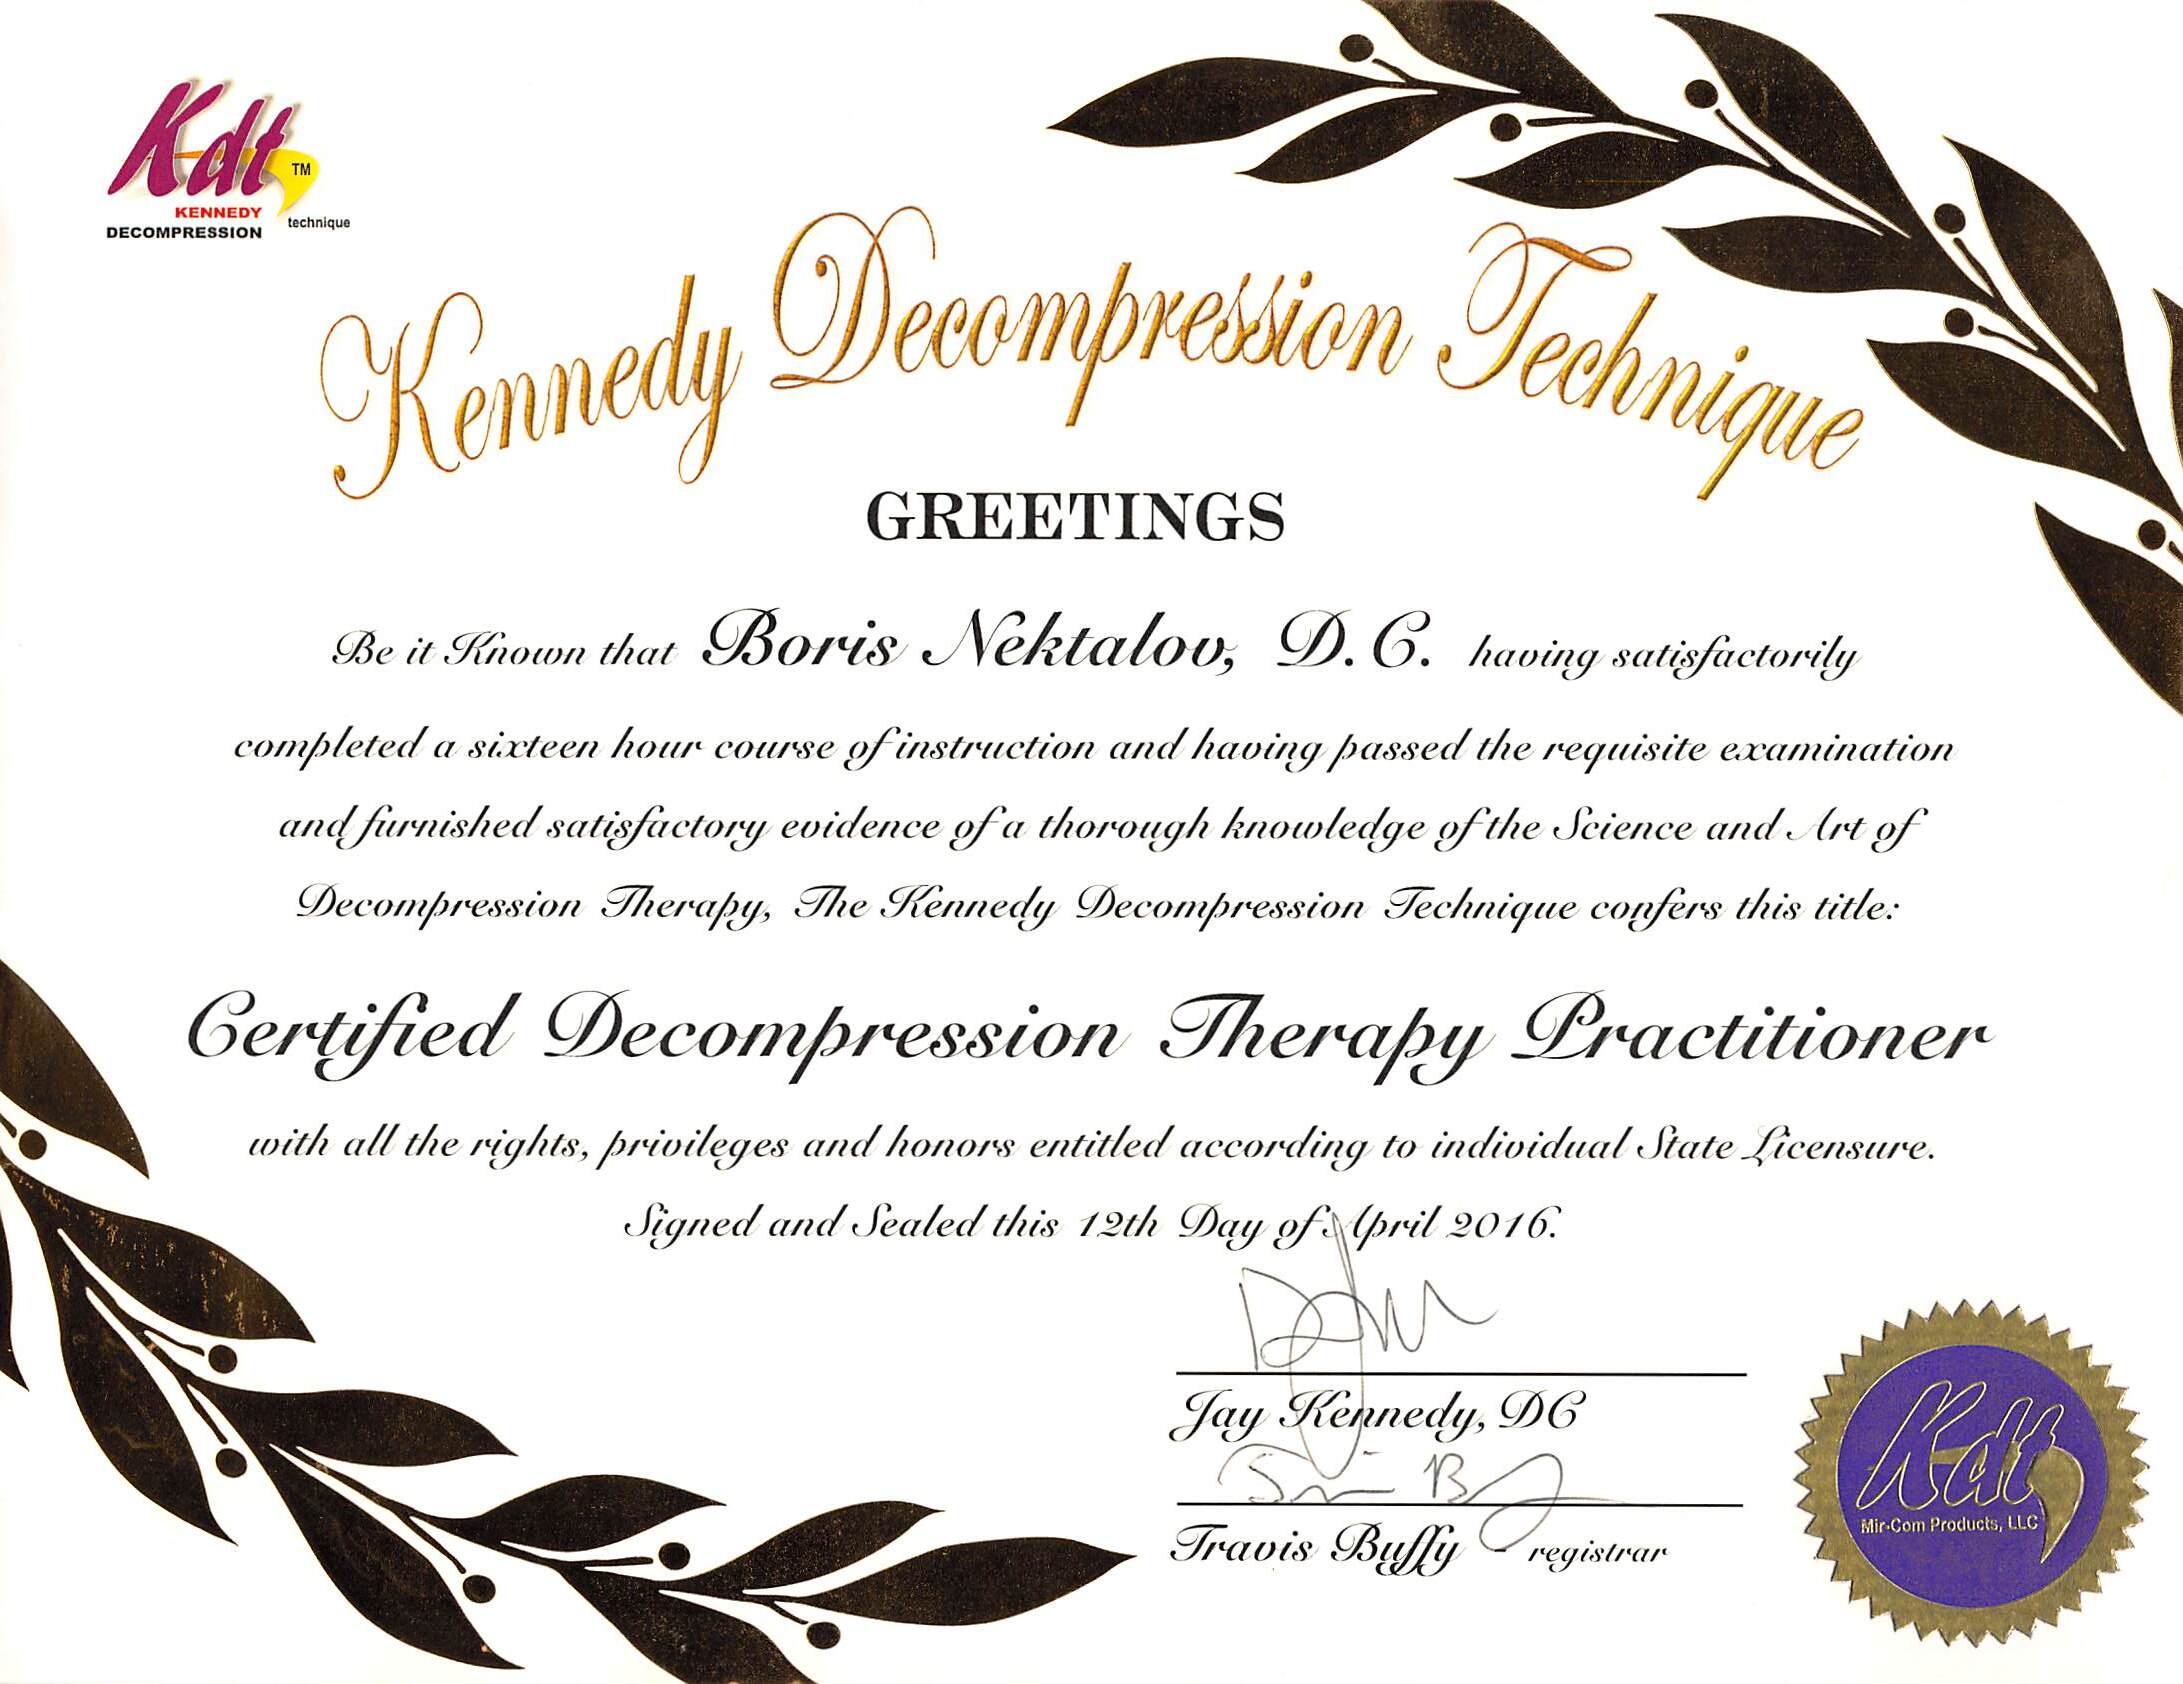 Certified Decompression therapy practitioner